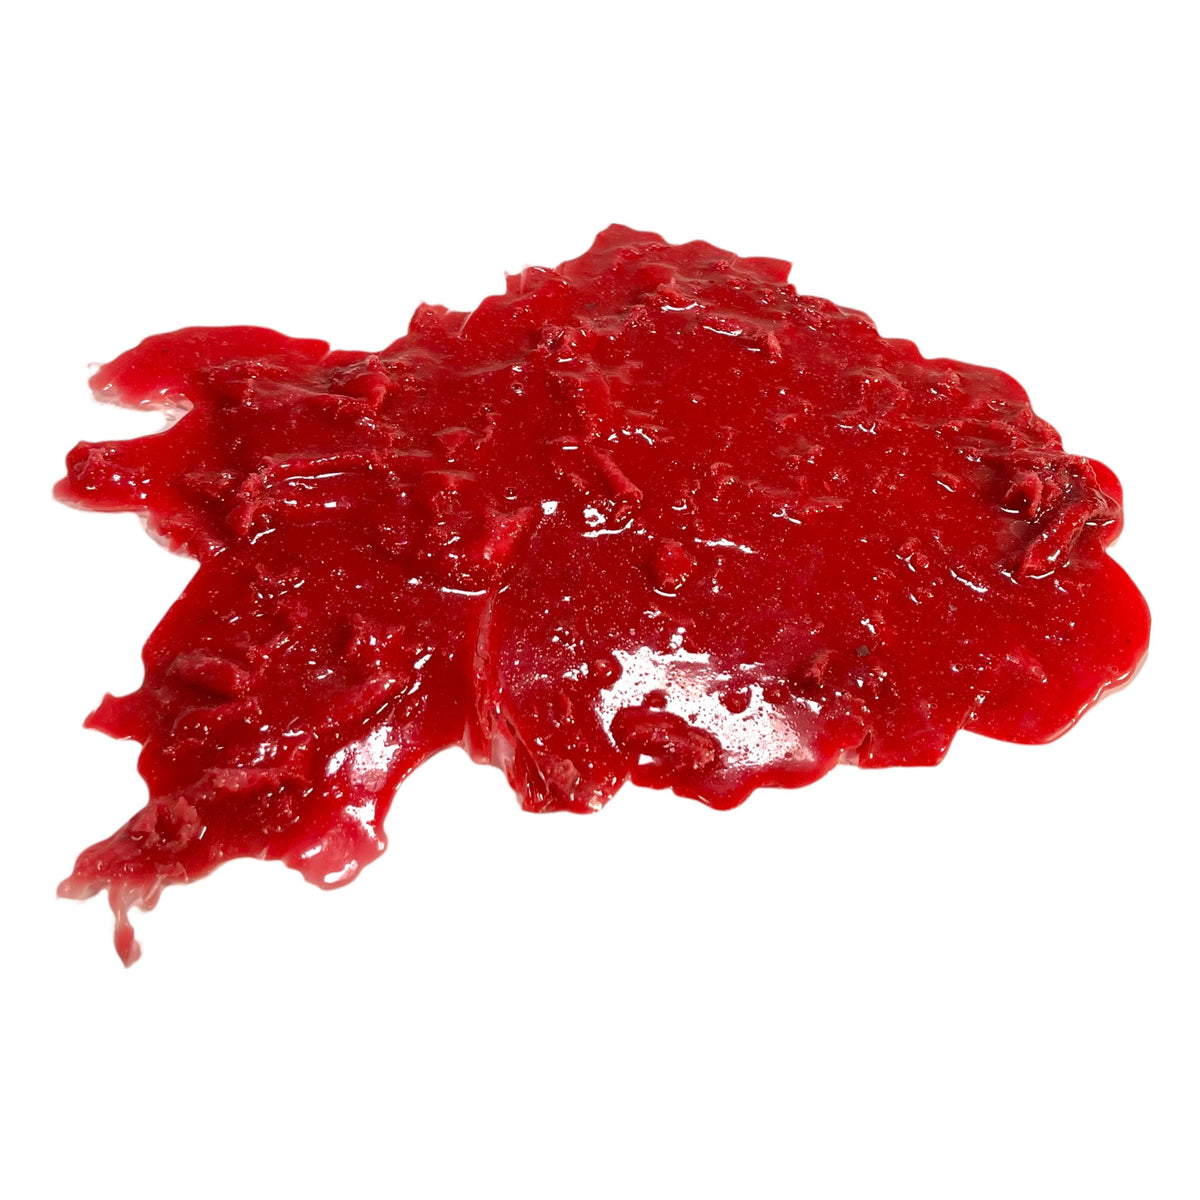 Silicone Chunky Blood Puddle Mat Prop - 12 inch x 12 inch